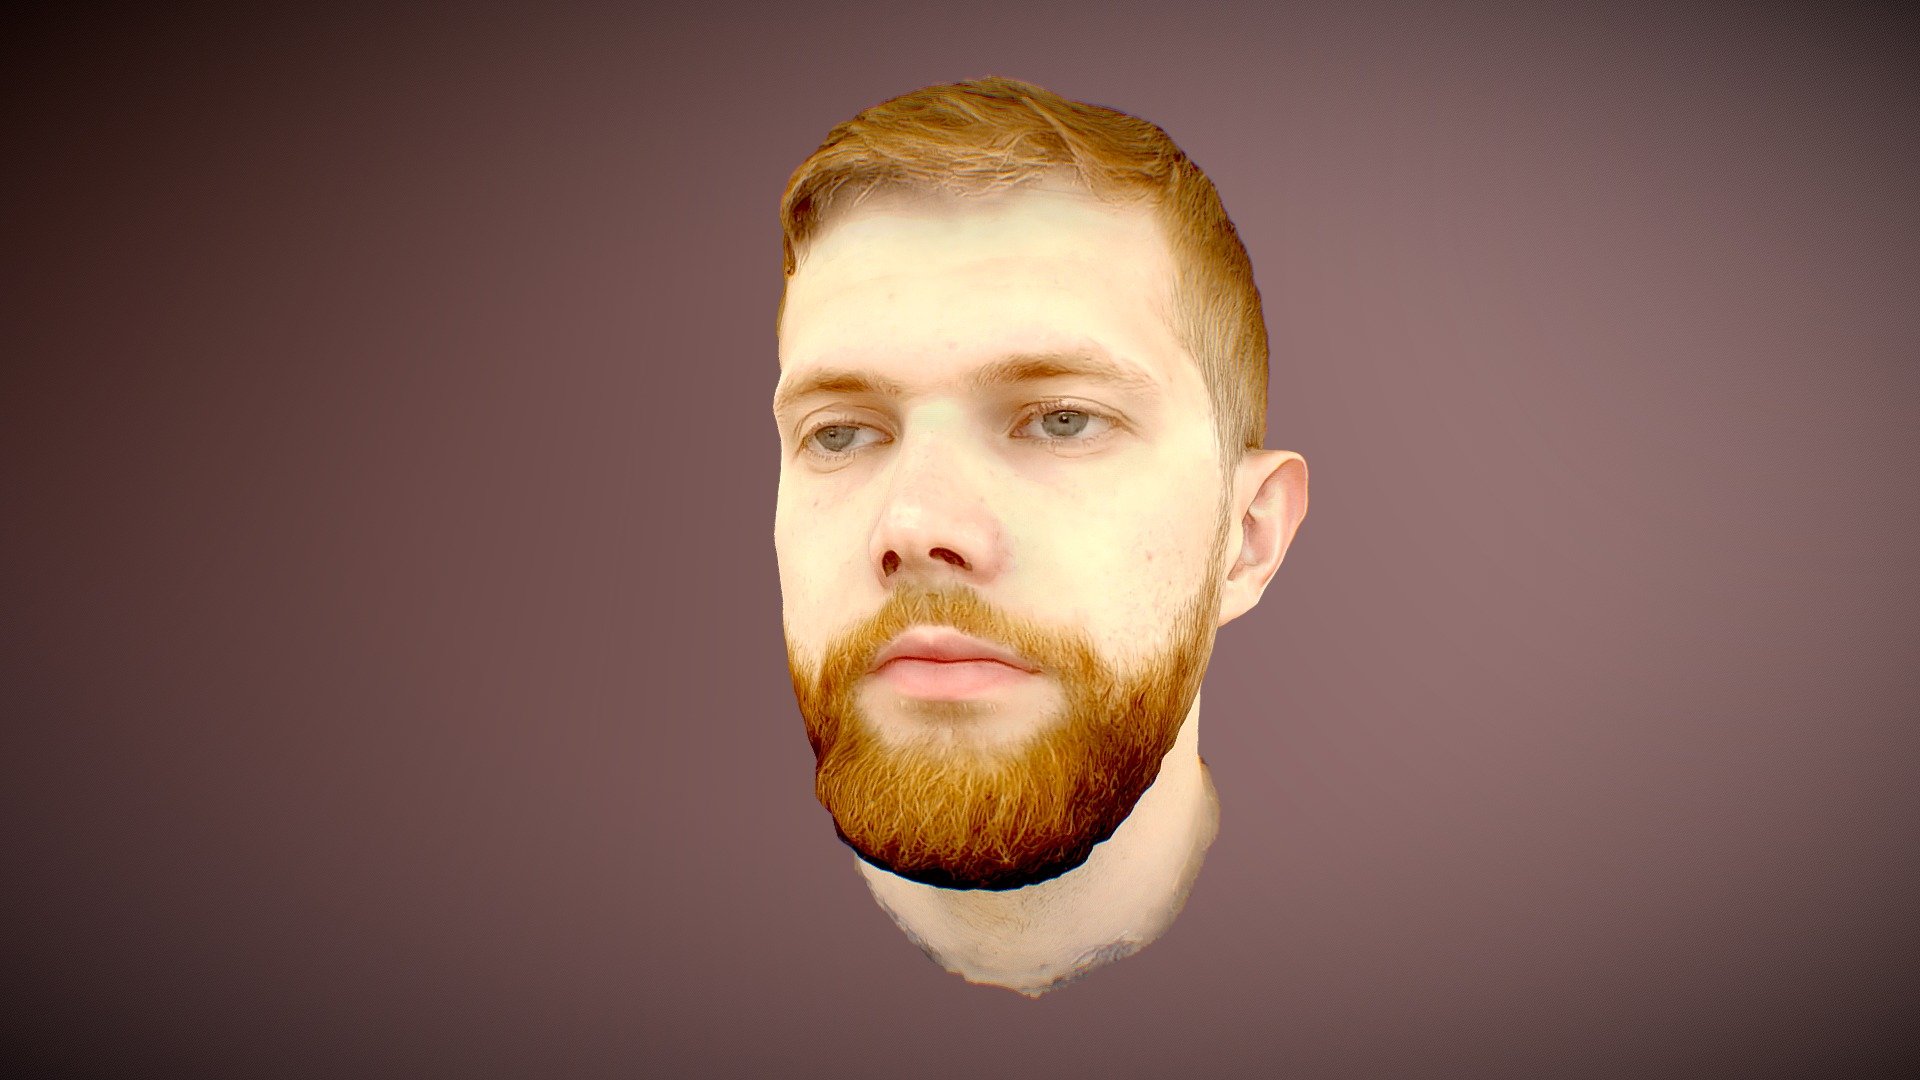 Raw realistic portrait of a person created using photogrammetry, ready for further retopology and cleanup of both mesh and texture for animation.

I have interest in 3D characters creation workflow using this technique since its relatively fast and cheap.

Photos were taken on smartphone and then uploaded to Agisoft Photoscan 3d model